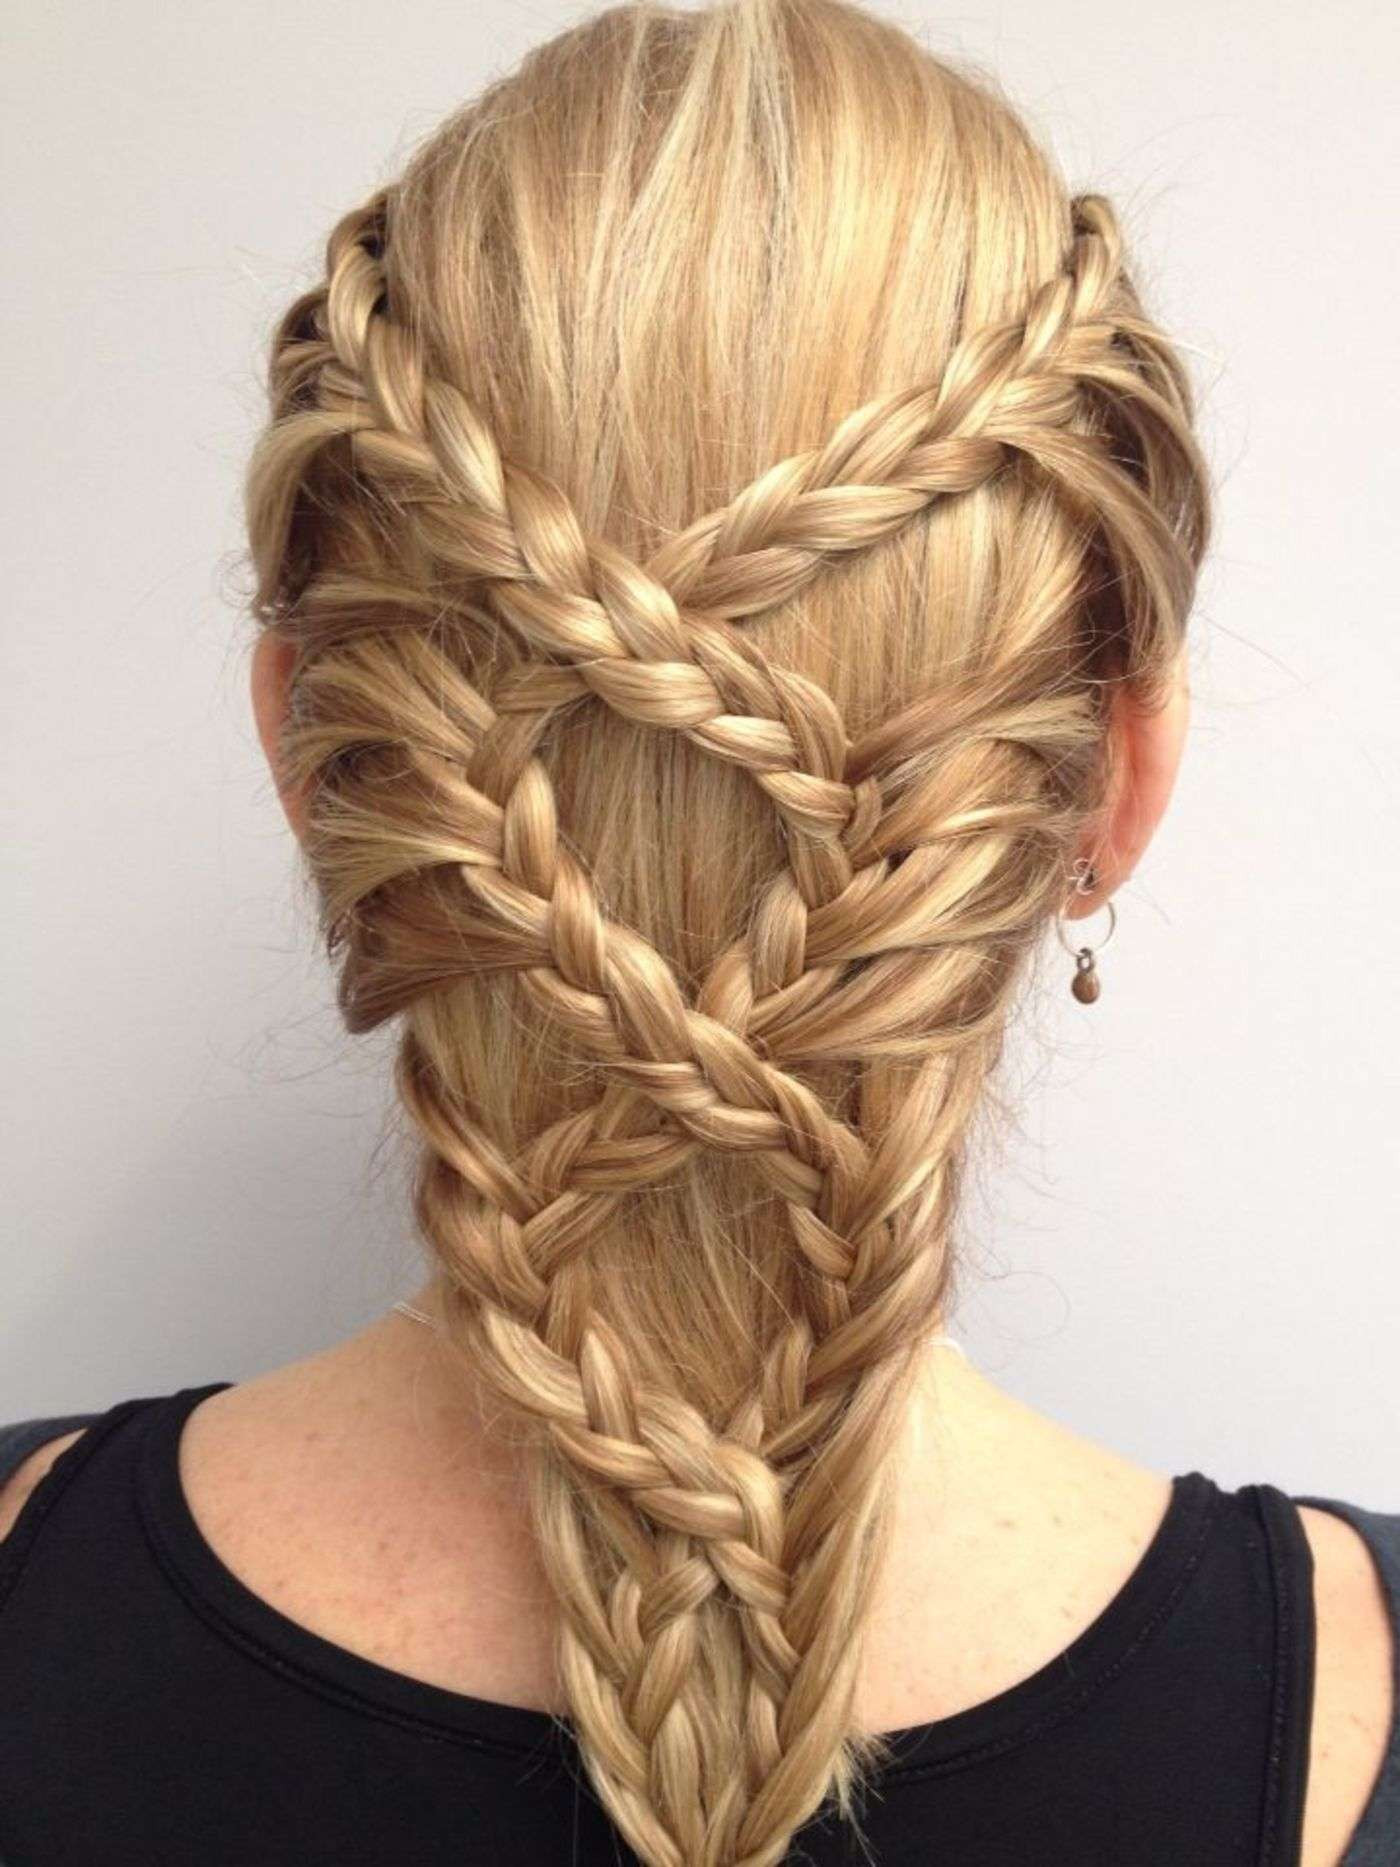 Good Braid Hairstyles
 Dare to Wear These 20 Crazy Hairstyles MagMent